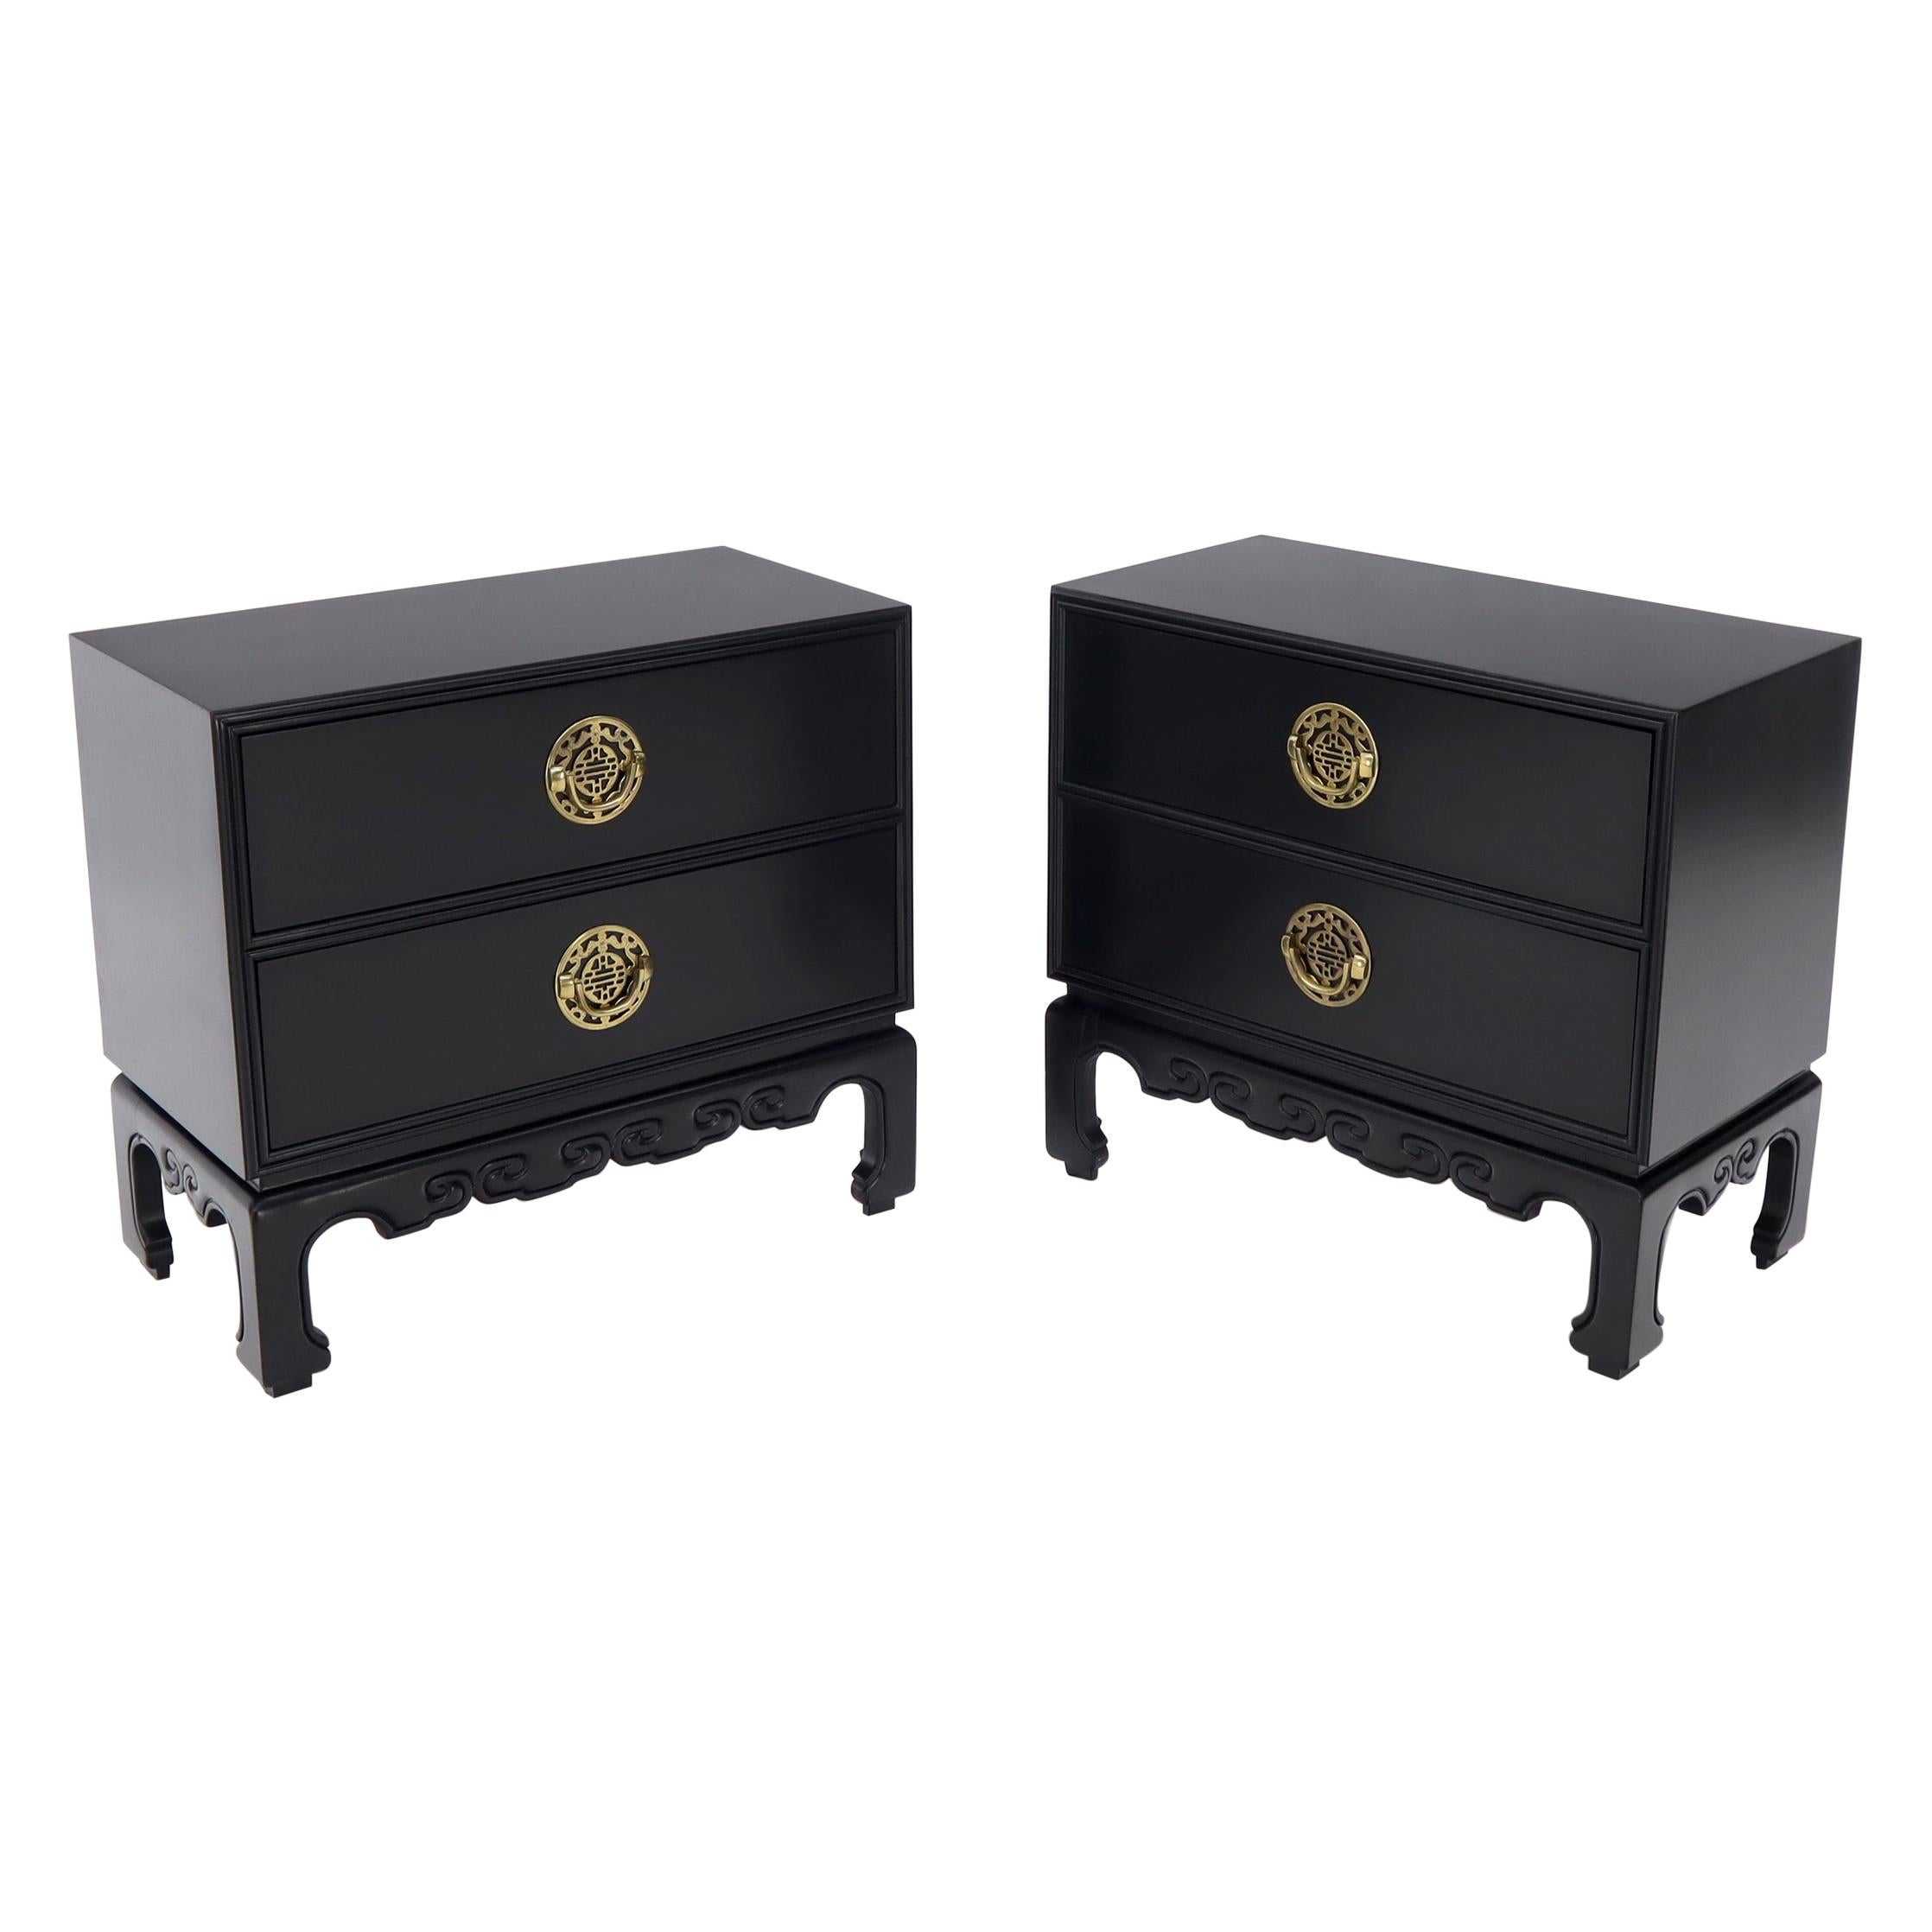 Pair of Black Lacquer Brass Hardware Two Doors Oriental End Tables or Nightstand